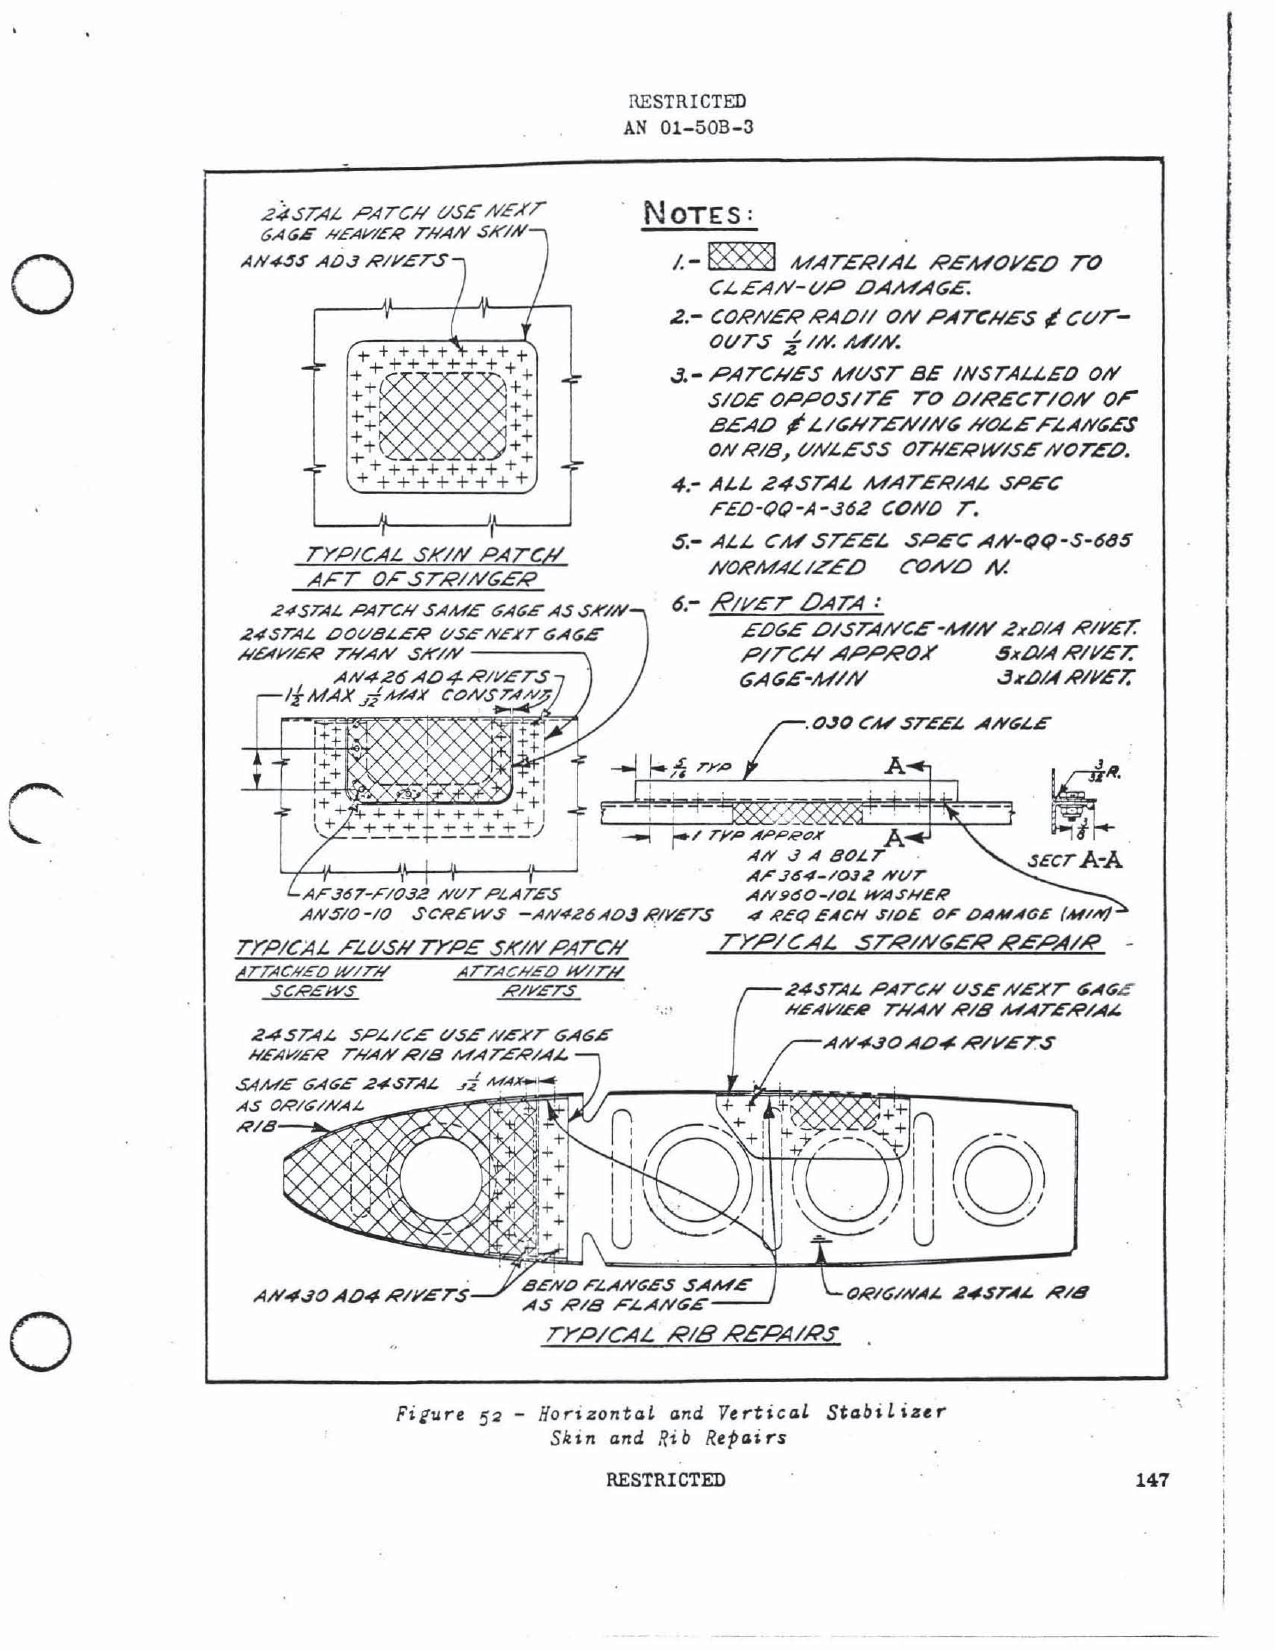 Sample page 150 from AirCorps Library document: Structural Repair Instructions - BT-13, BT-15, SNV-1